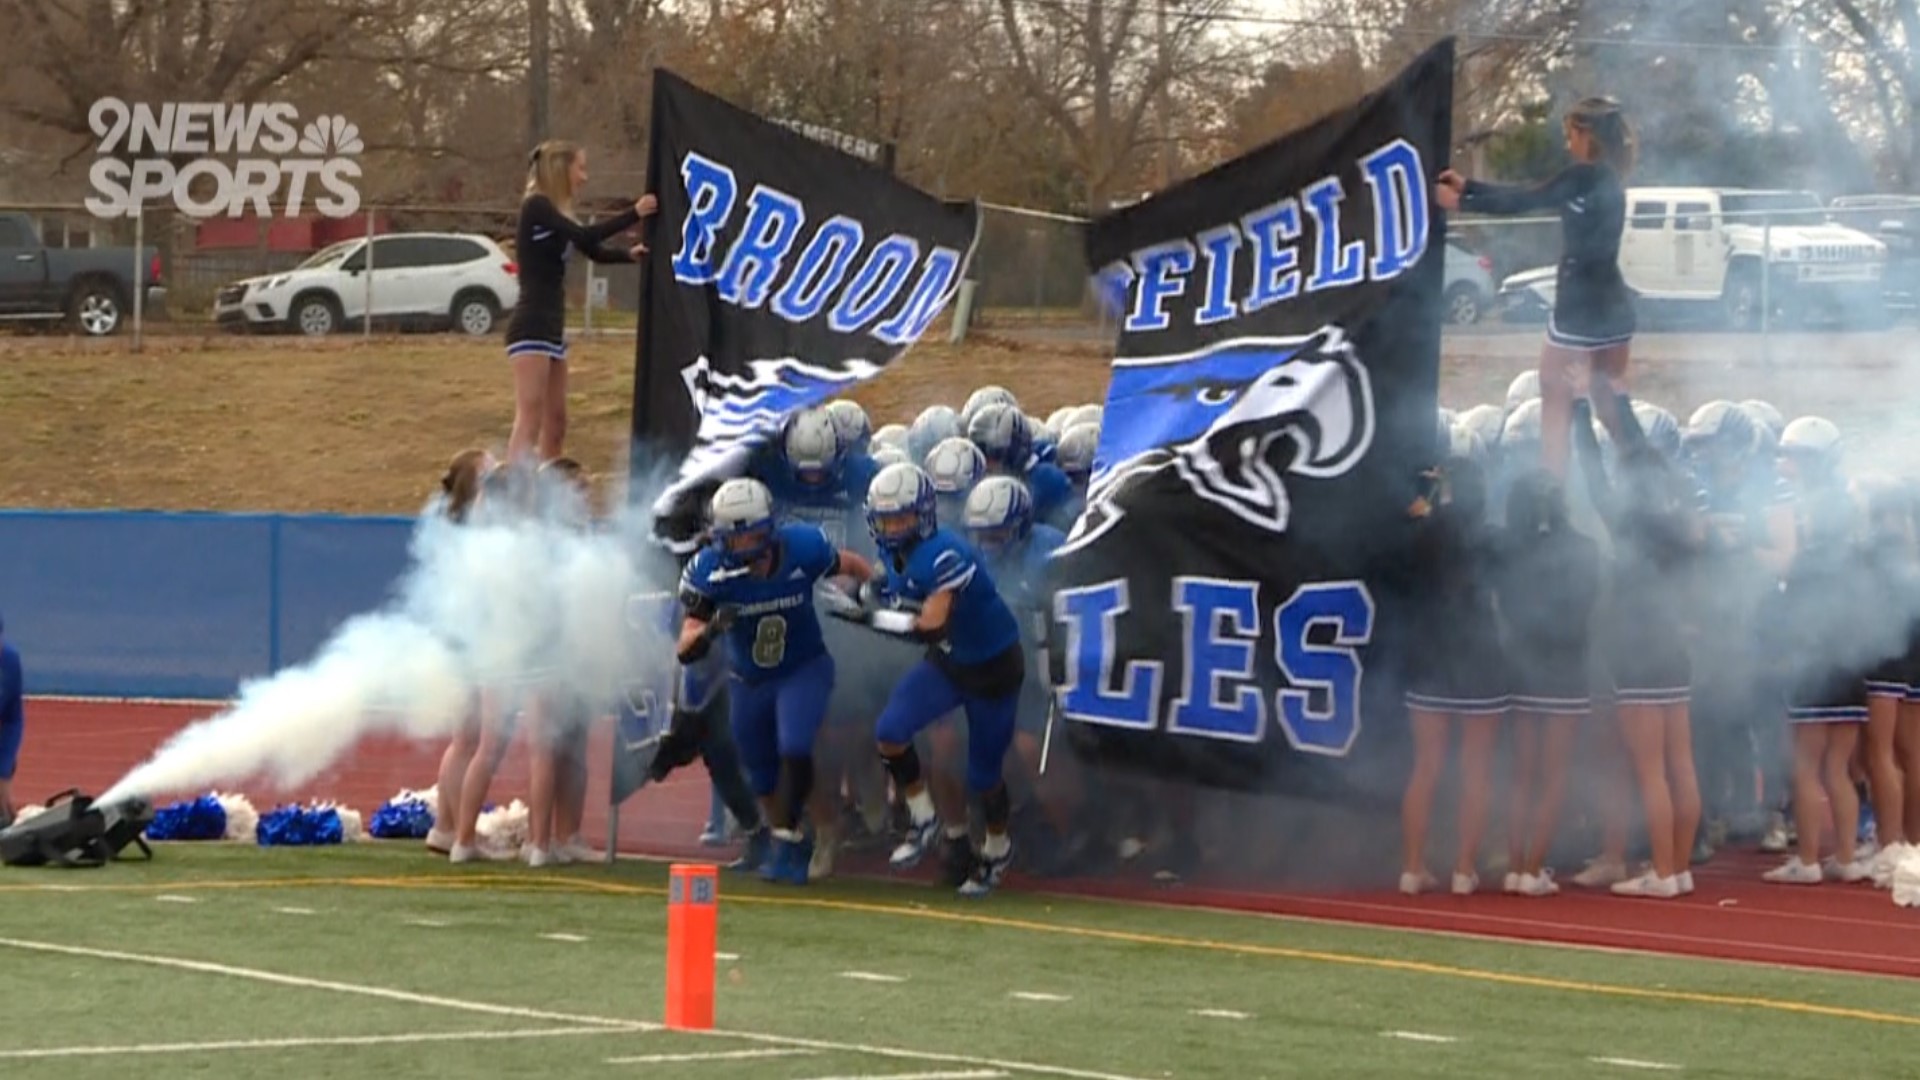 The Eagles defeated the Grizzlies 38-6 in the Class 4A quarterfinals on Saturday.